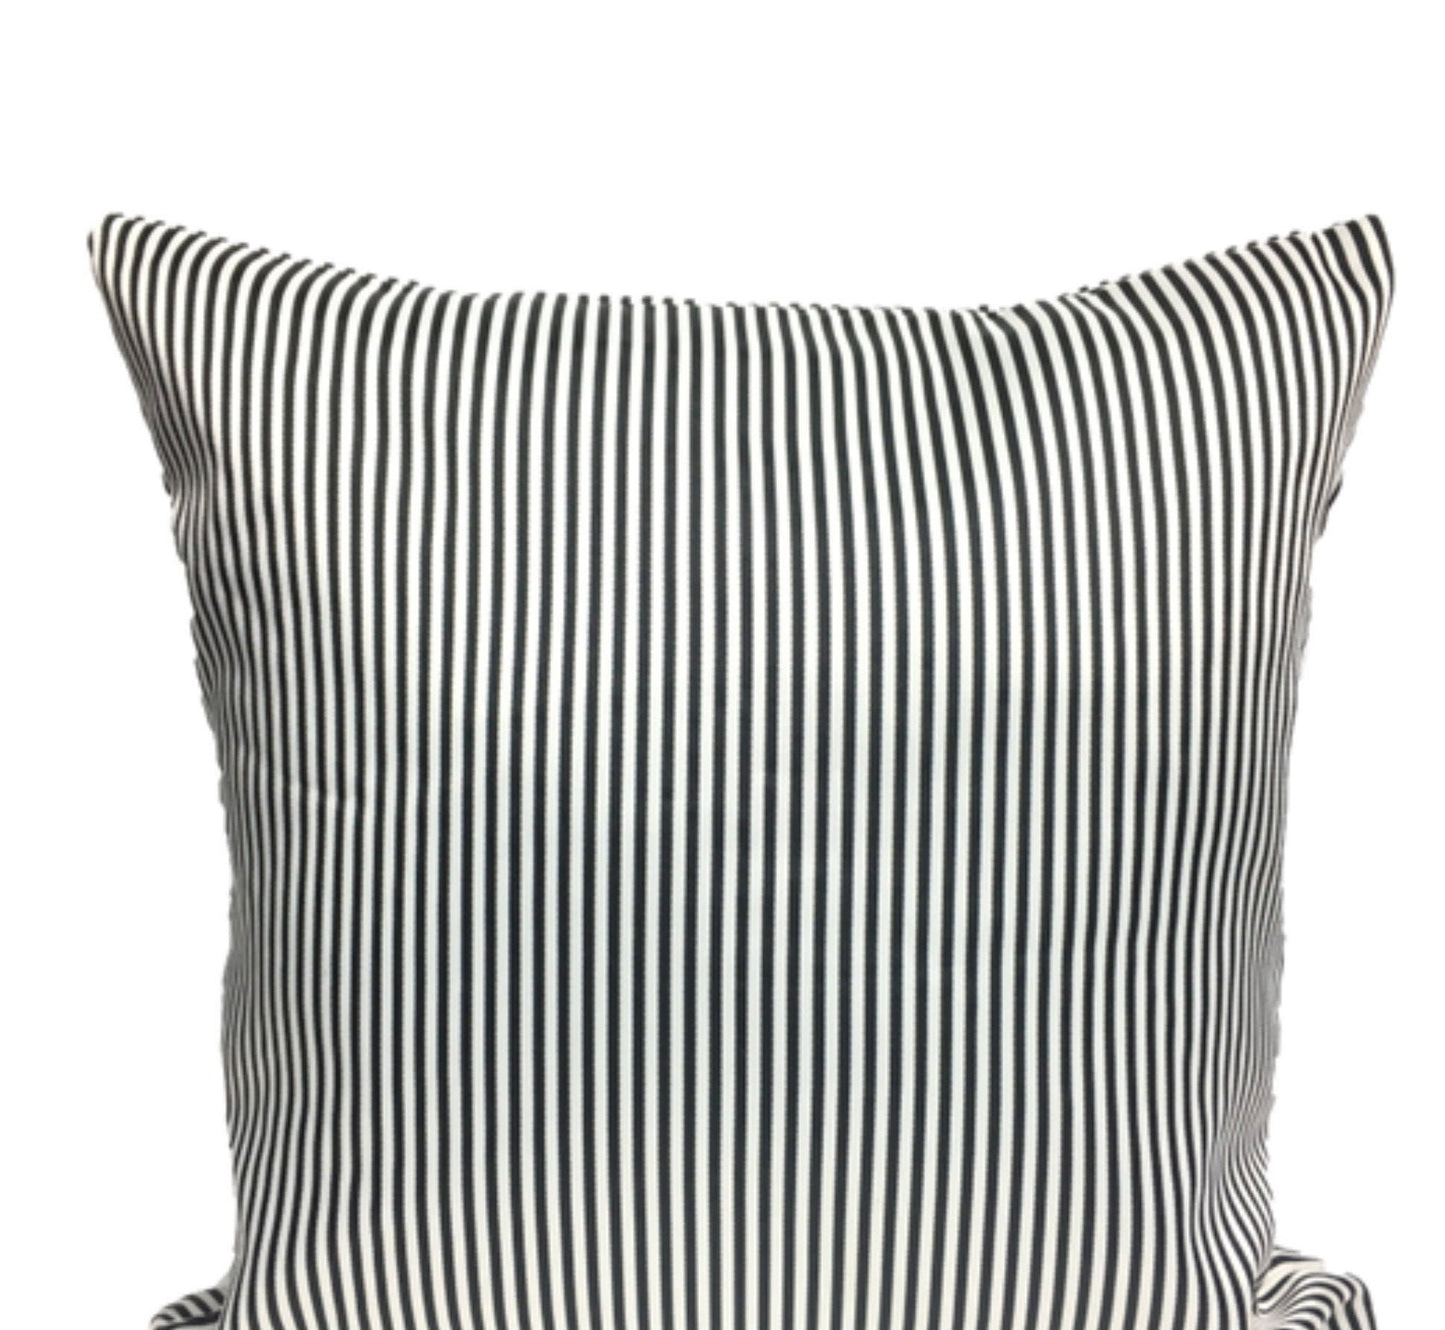 Tiwari Home 20 Black and Beige Striped Square Throw Pillow Cover with  Fringe Edges